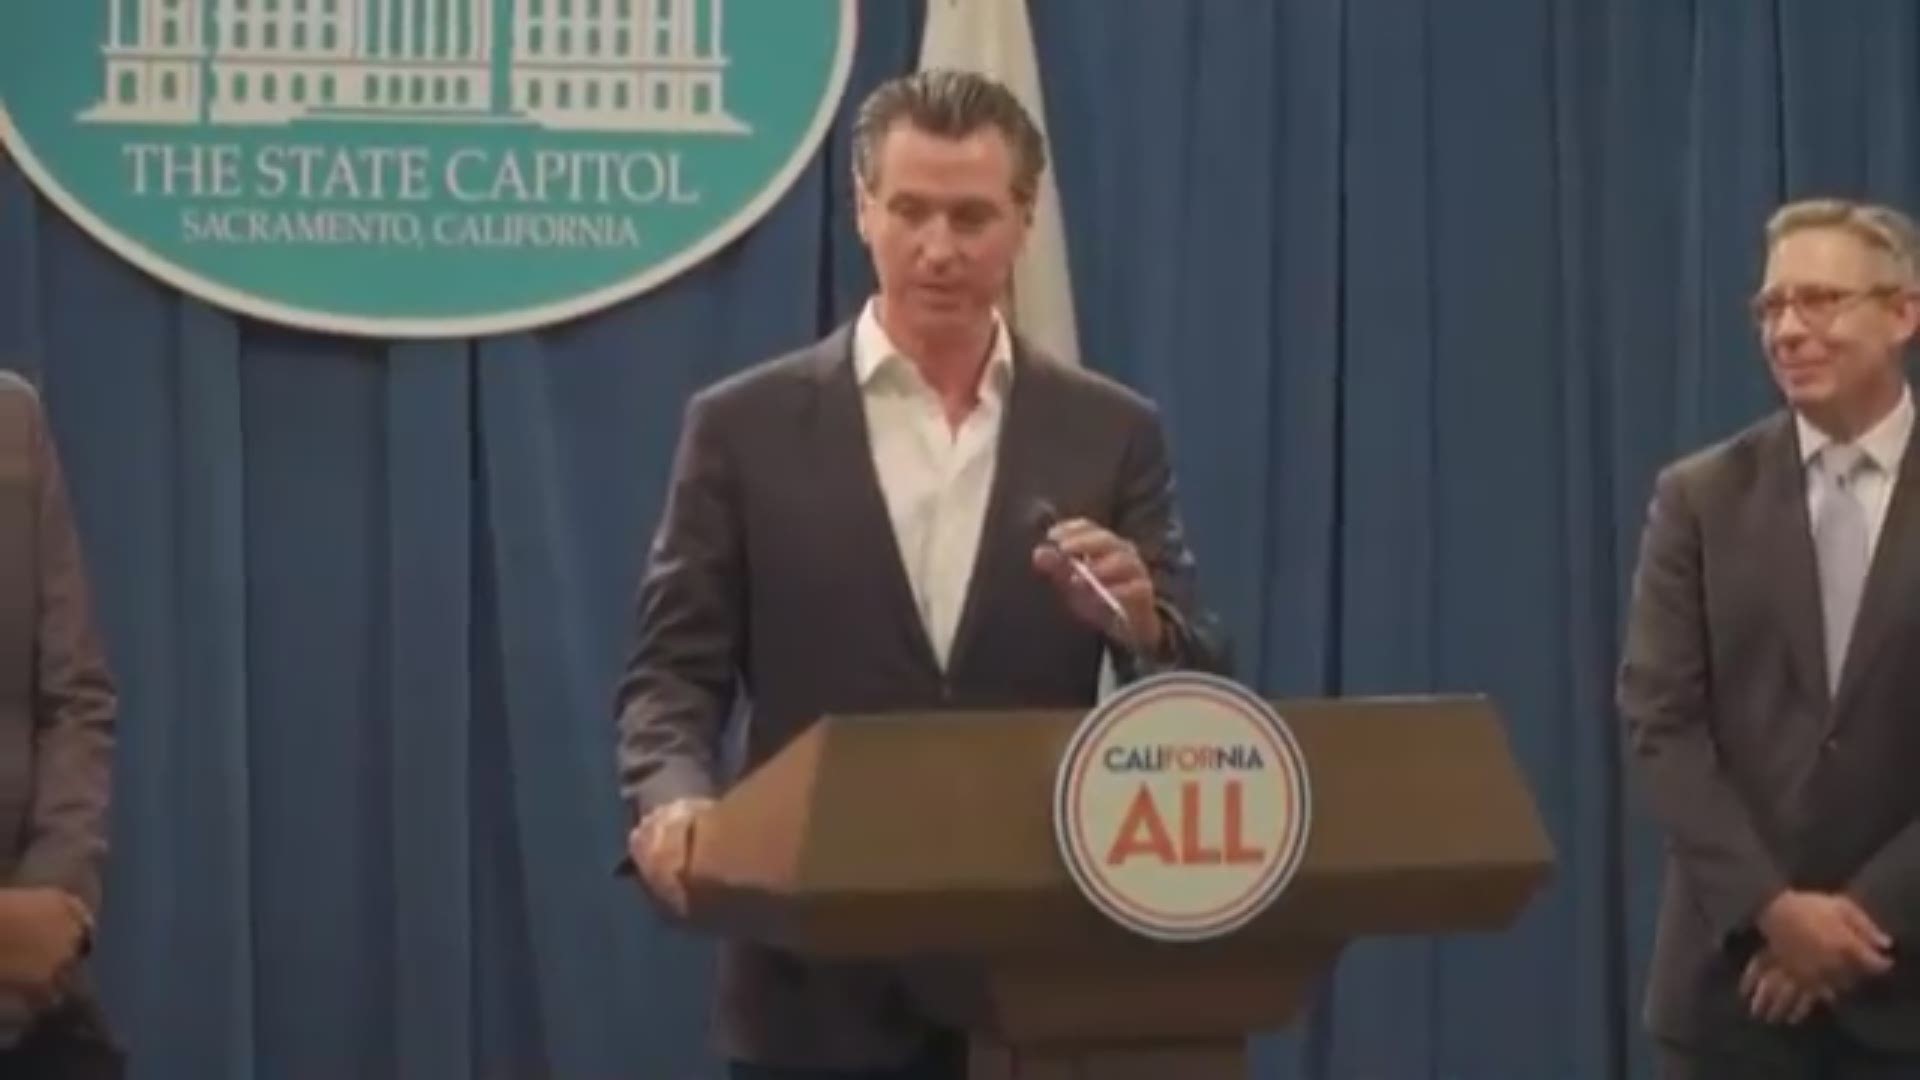 Newsom says he doesn't have the executive authority to ban flavored e-cigarettes. But he wants state lawmakers to send him a bill to do so next year.